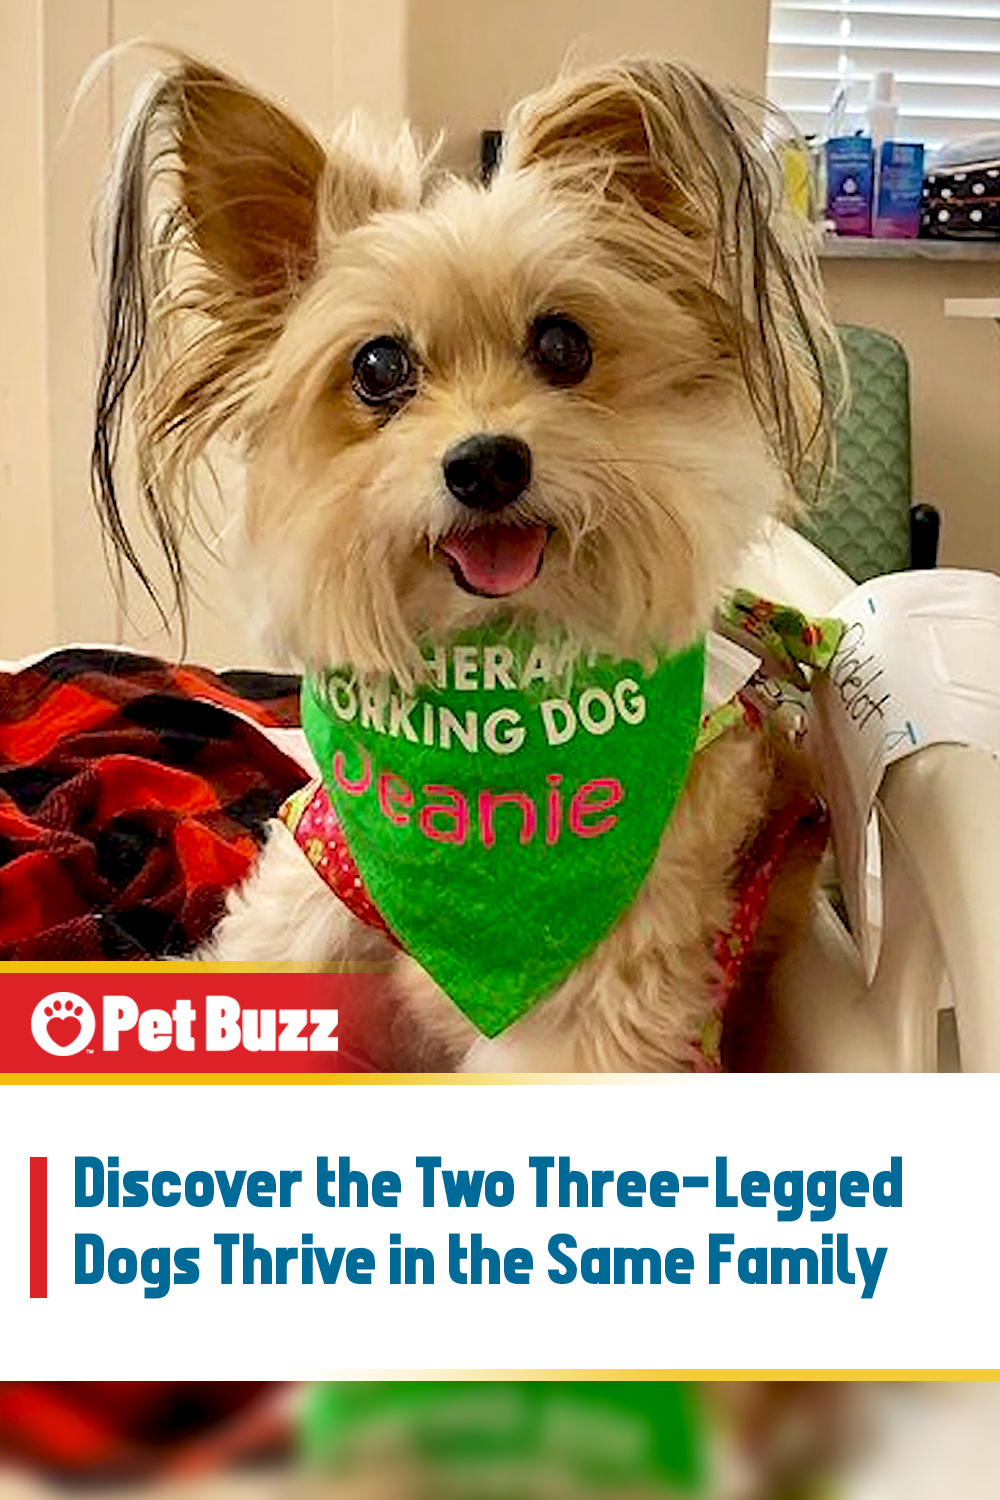 Discover the Two Three-Legged Dogs Thrive in the Same Family